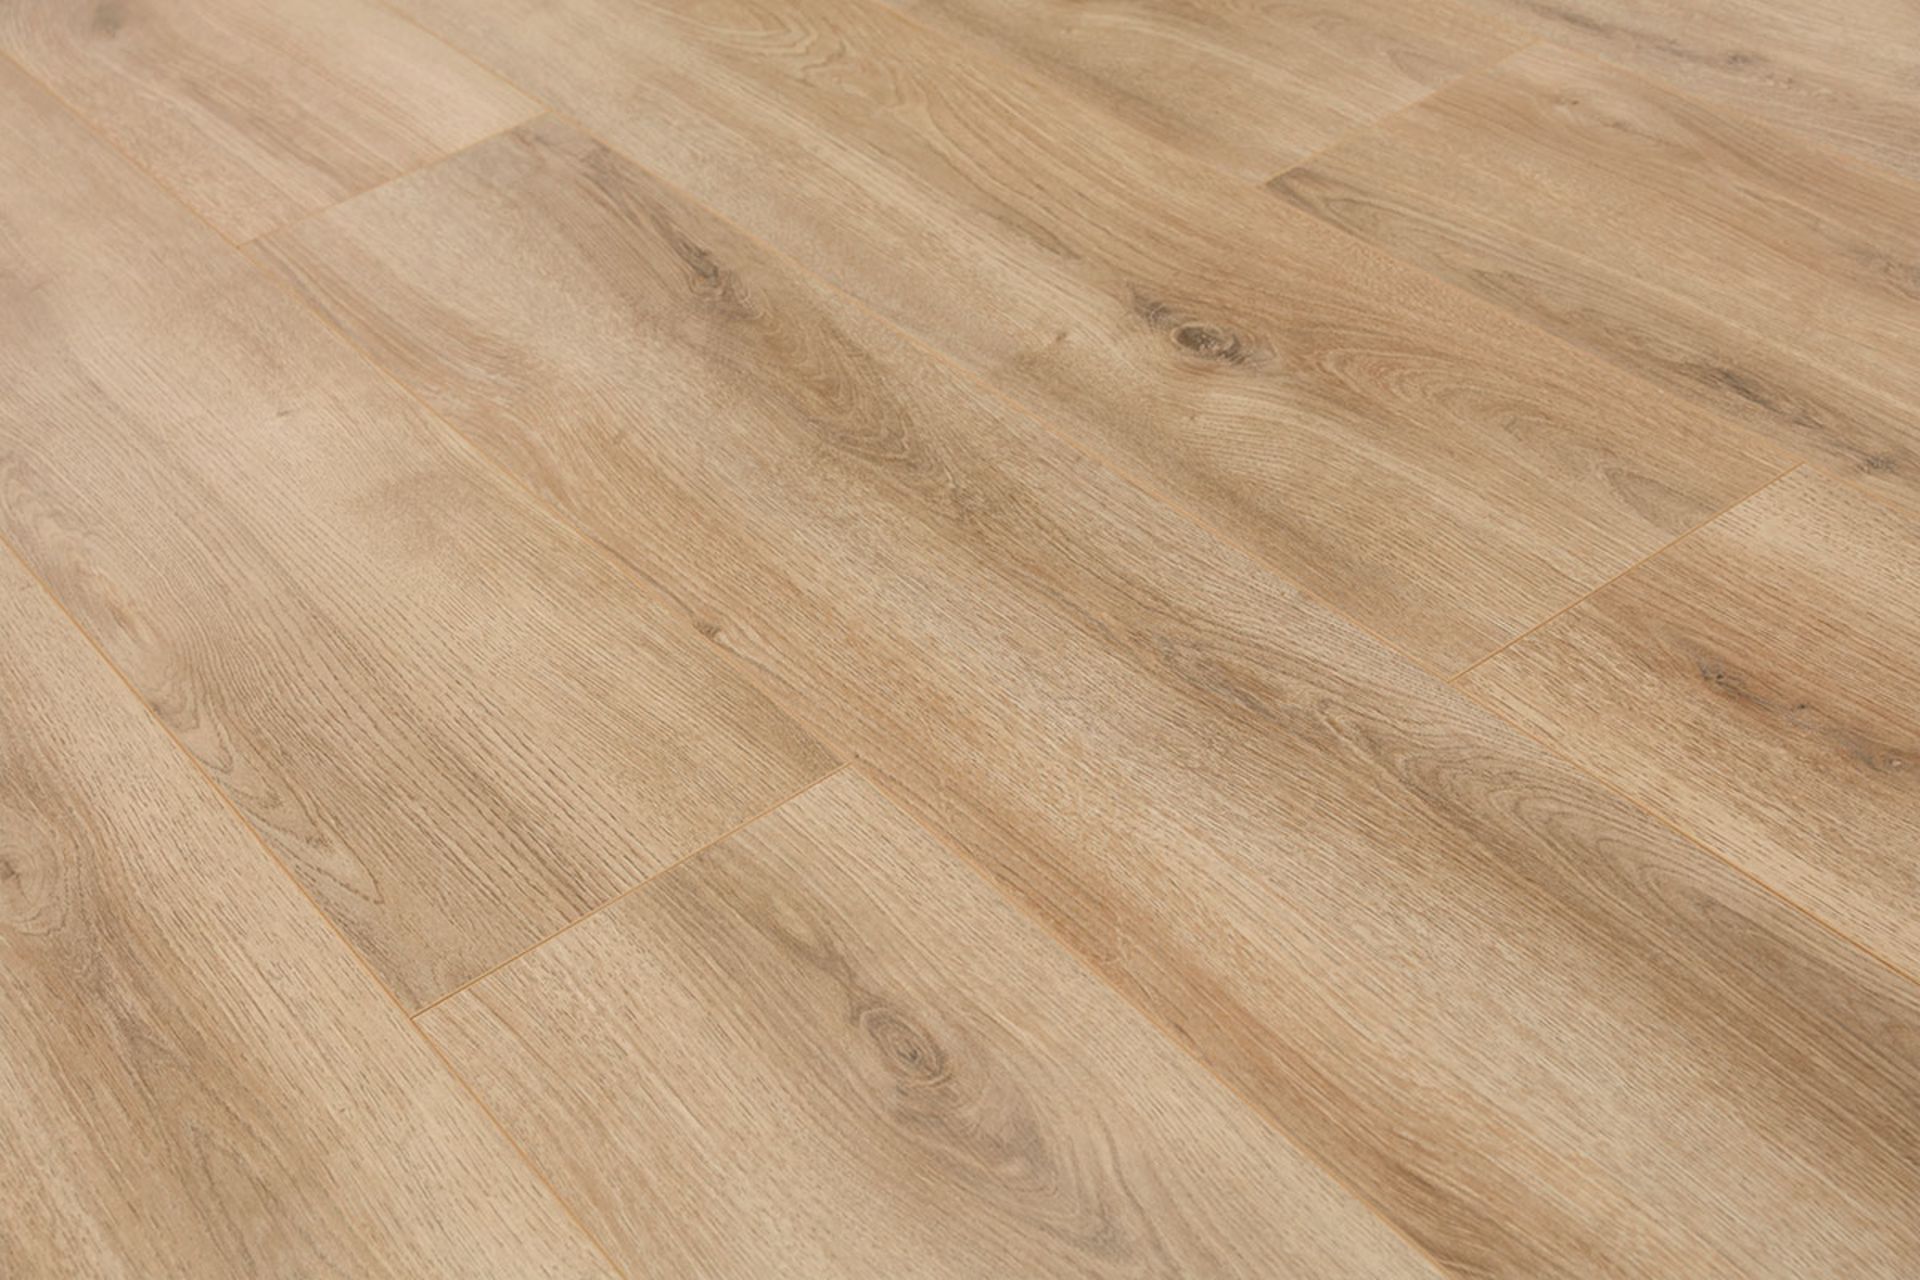 NEW 14.34 Square Meters of LAMINATE FLOORING SUMMER NATURAL OAK. With a warming natural oak tone, - Image 2 of 2